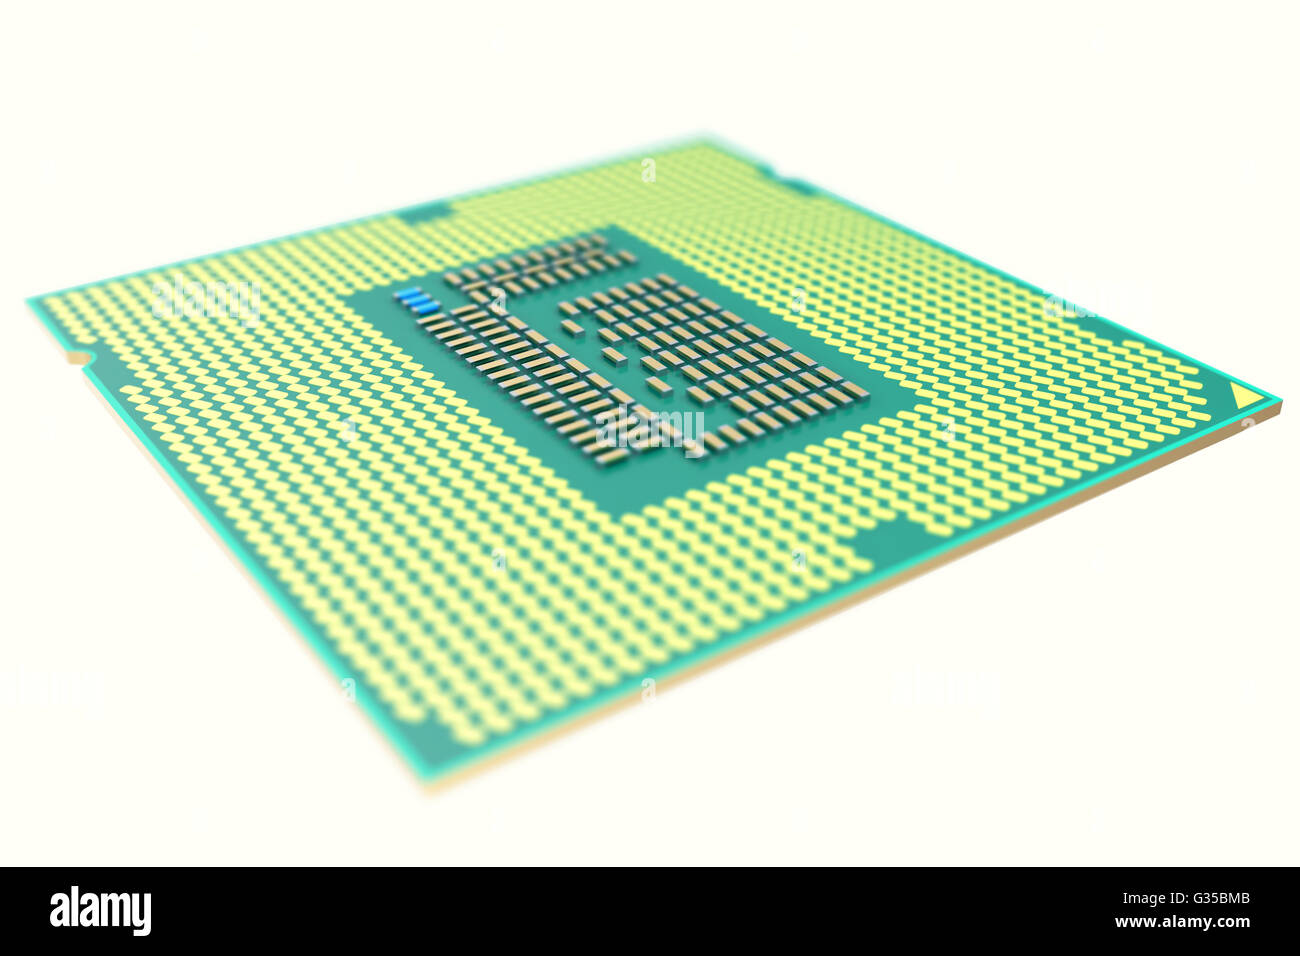 CPU chip, central processor unit, isolated on white with depth of field effects. 3d illustration Stock Photo